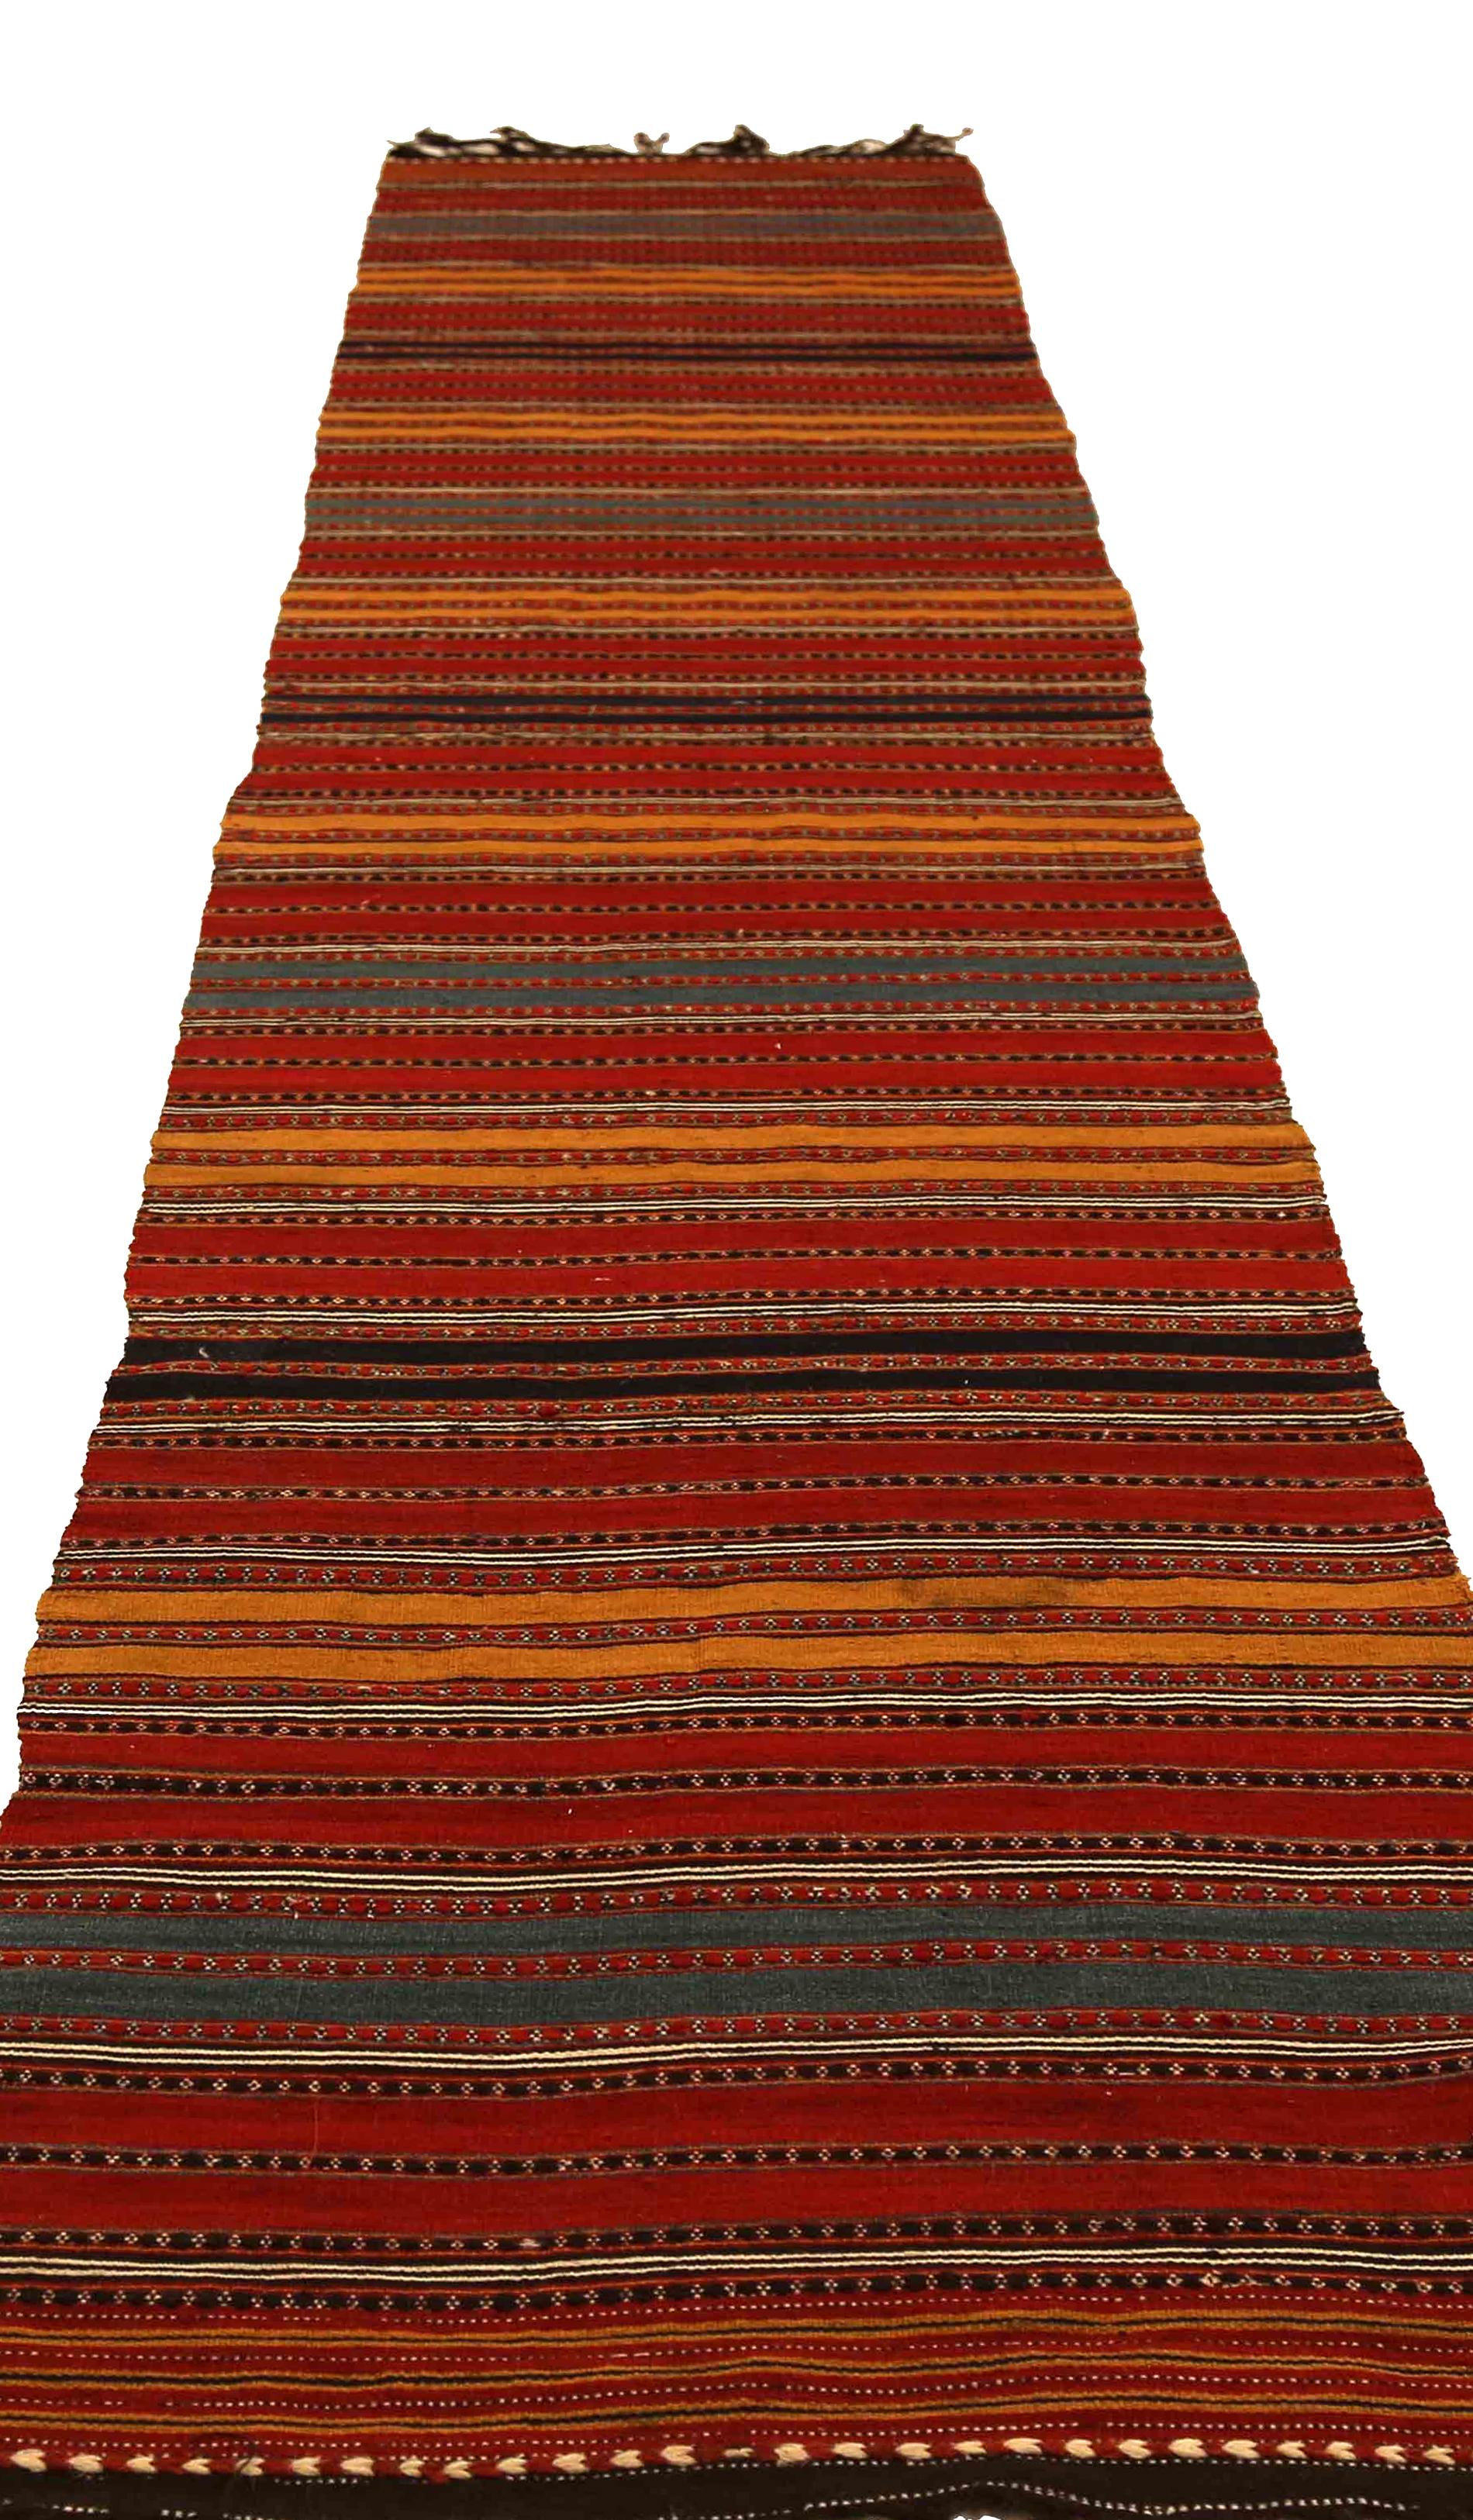 Antique handmade Persian runner rug from high quality sheep’s wool and colored with eco-friendly vegetable dyes that are proven safe for humans and pets alike. It’s a Classic Kilim design showcasing multicolored stripes. It’s a lovely piece that